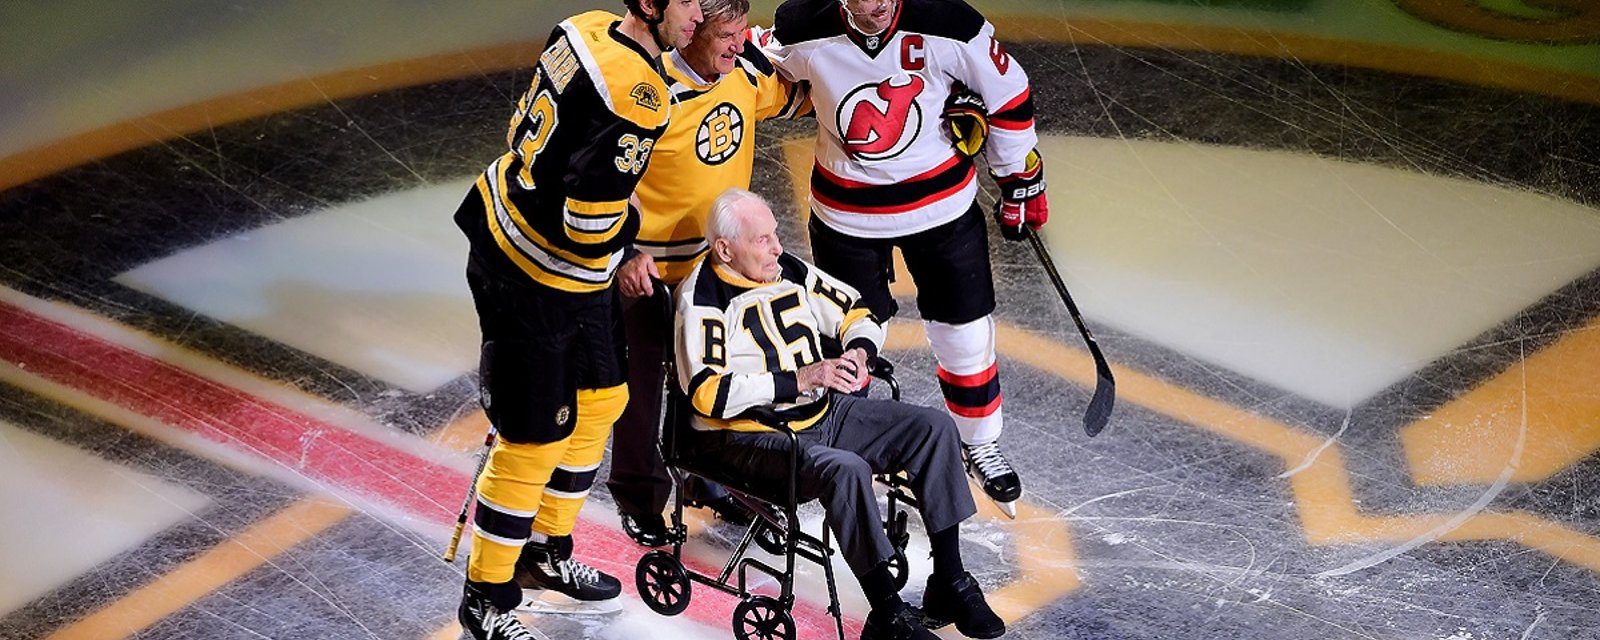 Breaking: Hockey Hall-of-Famer has reportedly passed away.